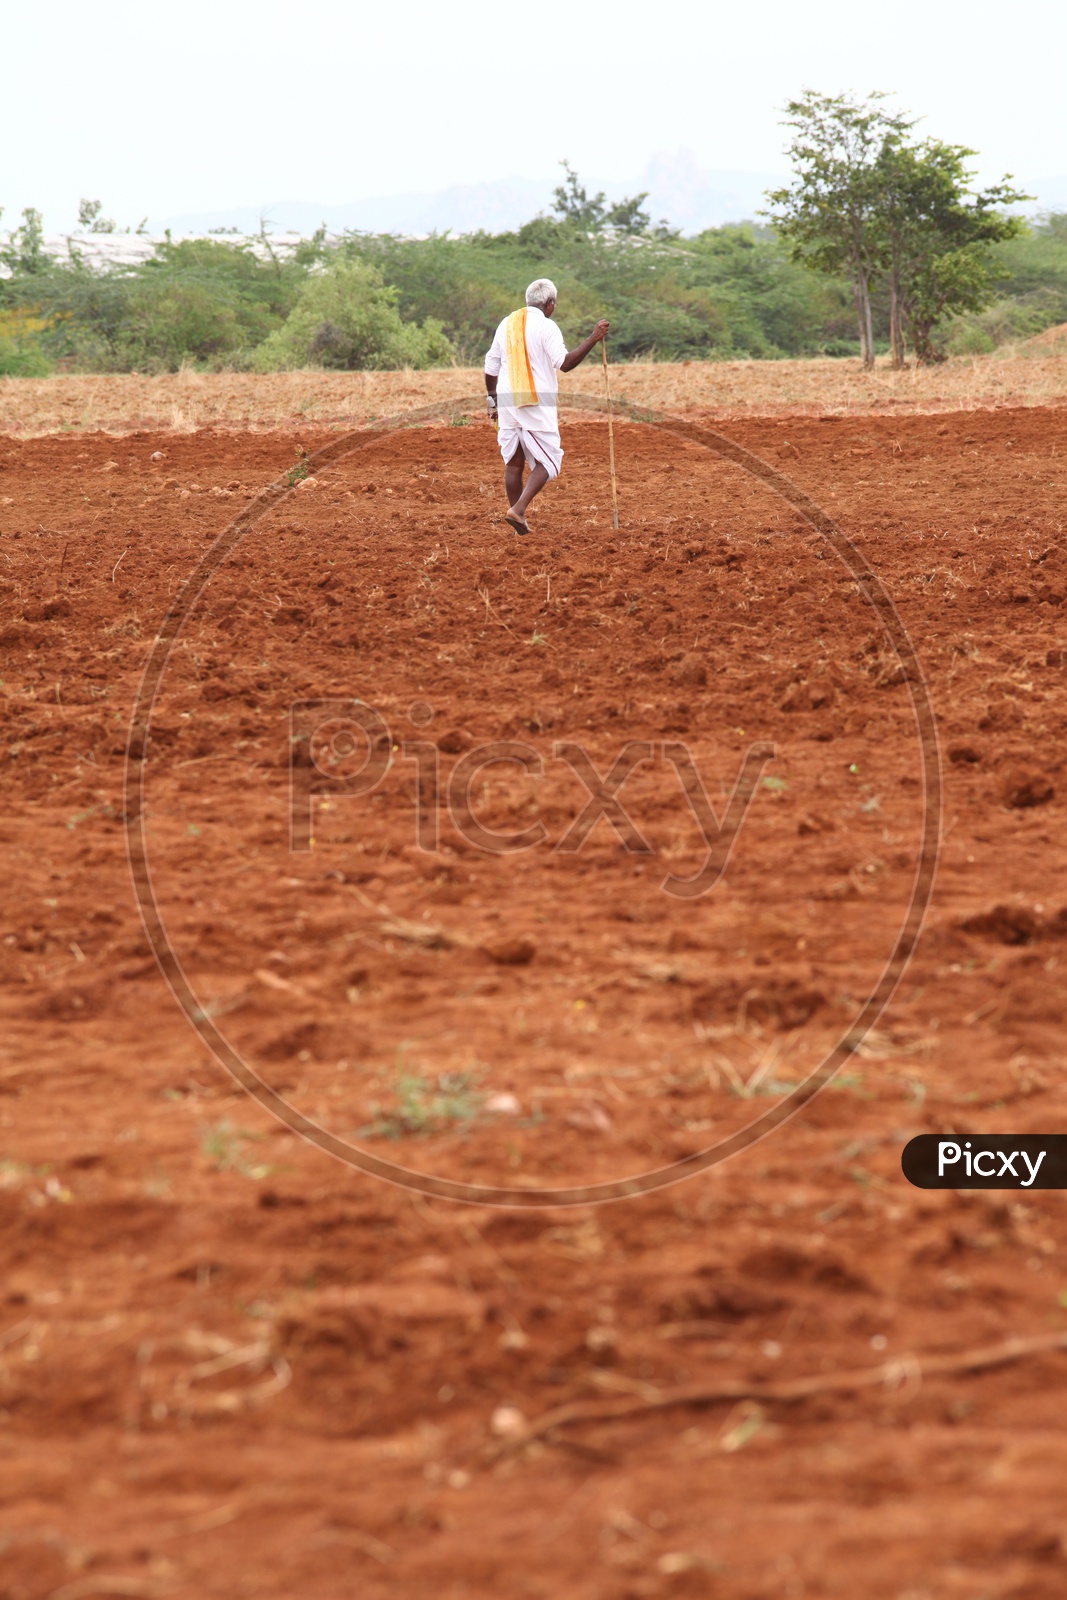 Old man walking in agriculture fields